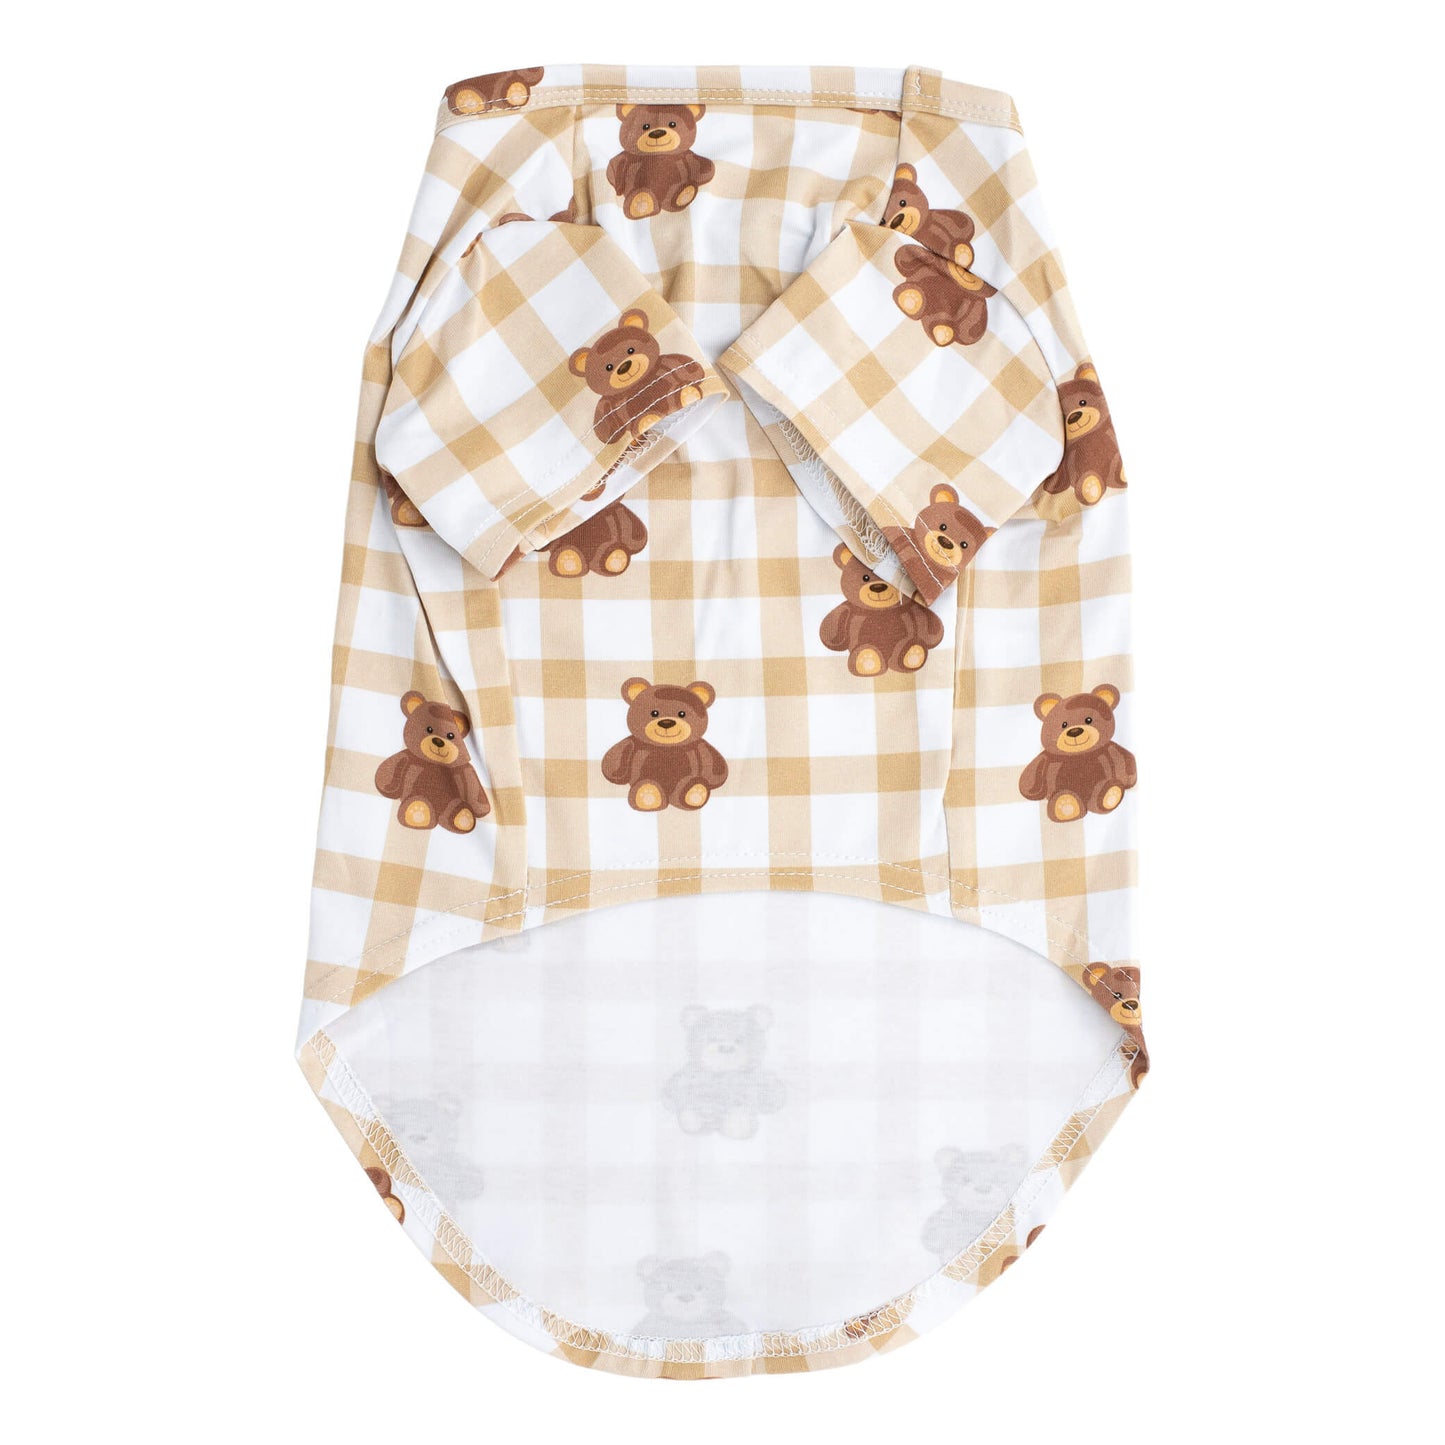 Front profile of Vibrant Hounds Teddy Bear pyjamas for dogs. It is brown and white gingham with teddy bears printed on it.